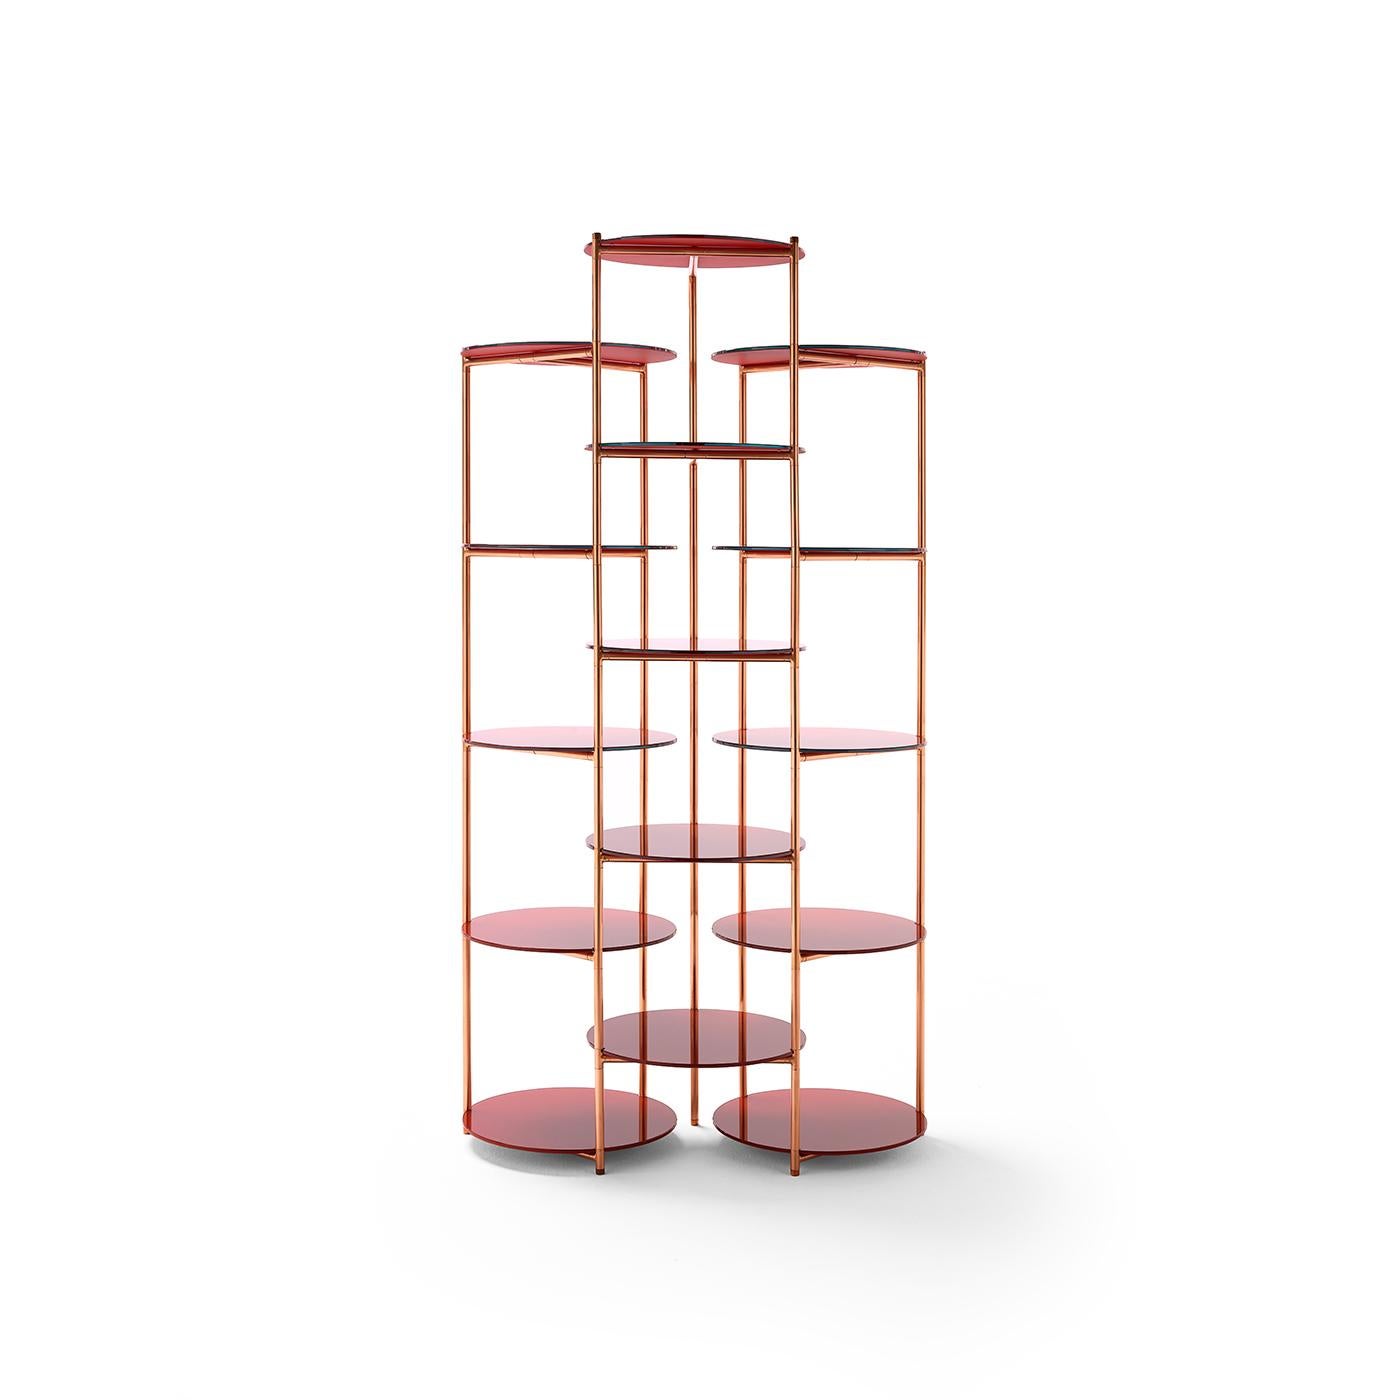 Built with a cylindrical frame combining steel and copper, this glamorous étagère has an open design. The three columns each feature five shelves in back-painted glass, creating a reflective, two-tone look that both pleases the eye and offers plenty